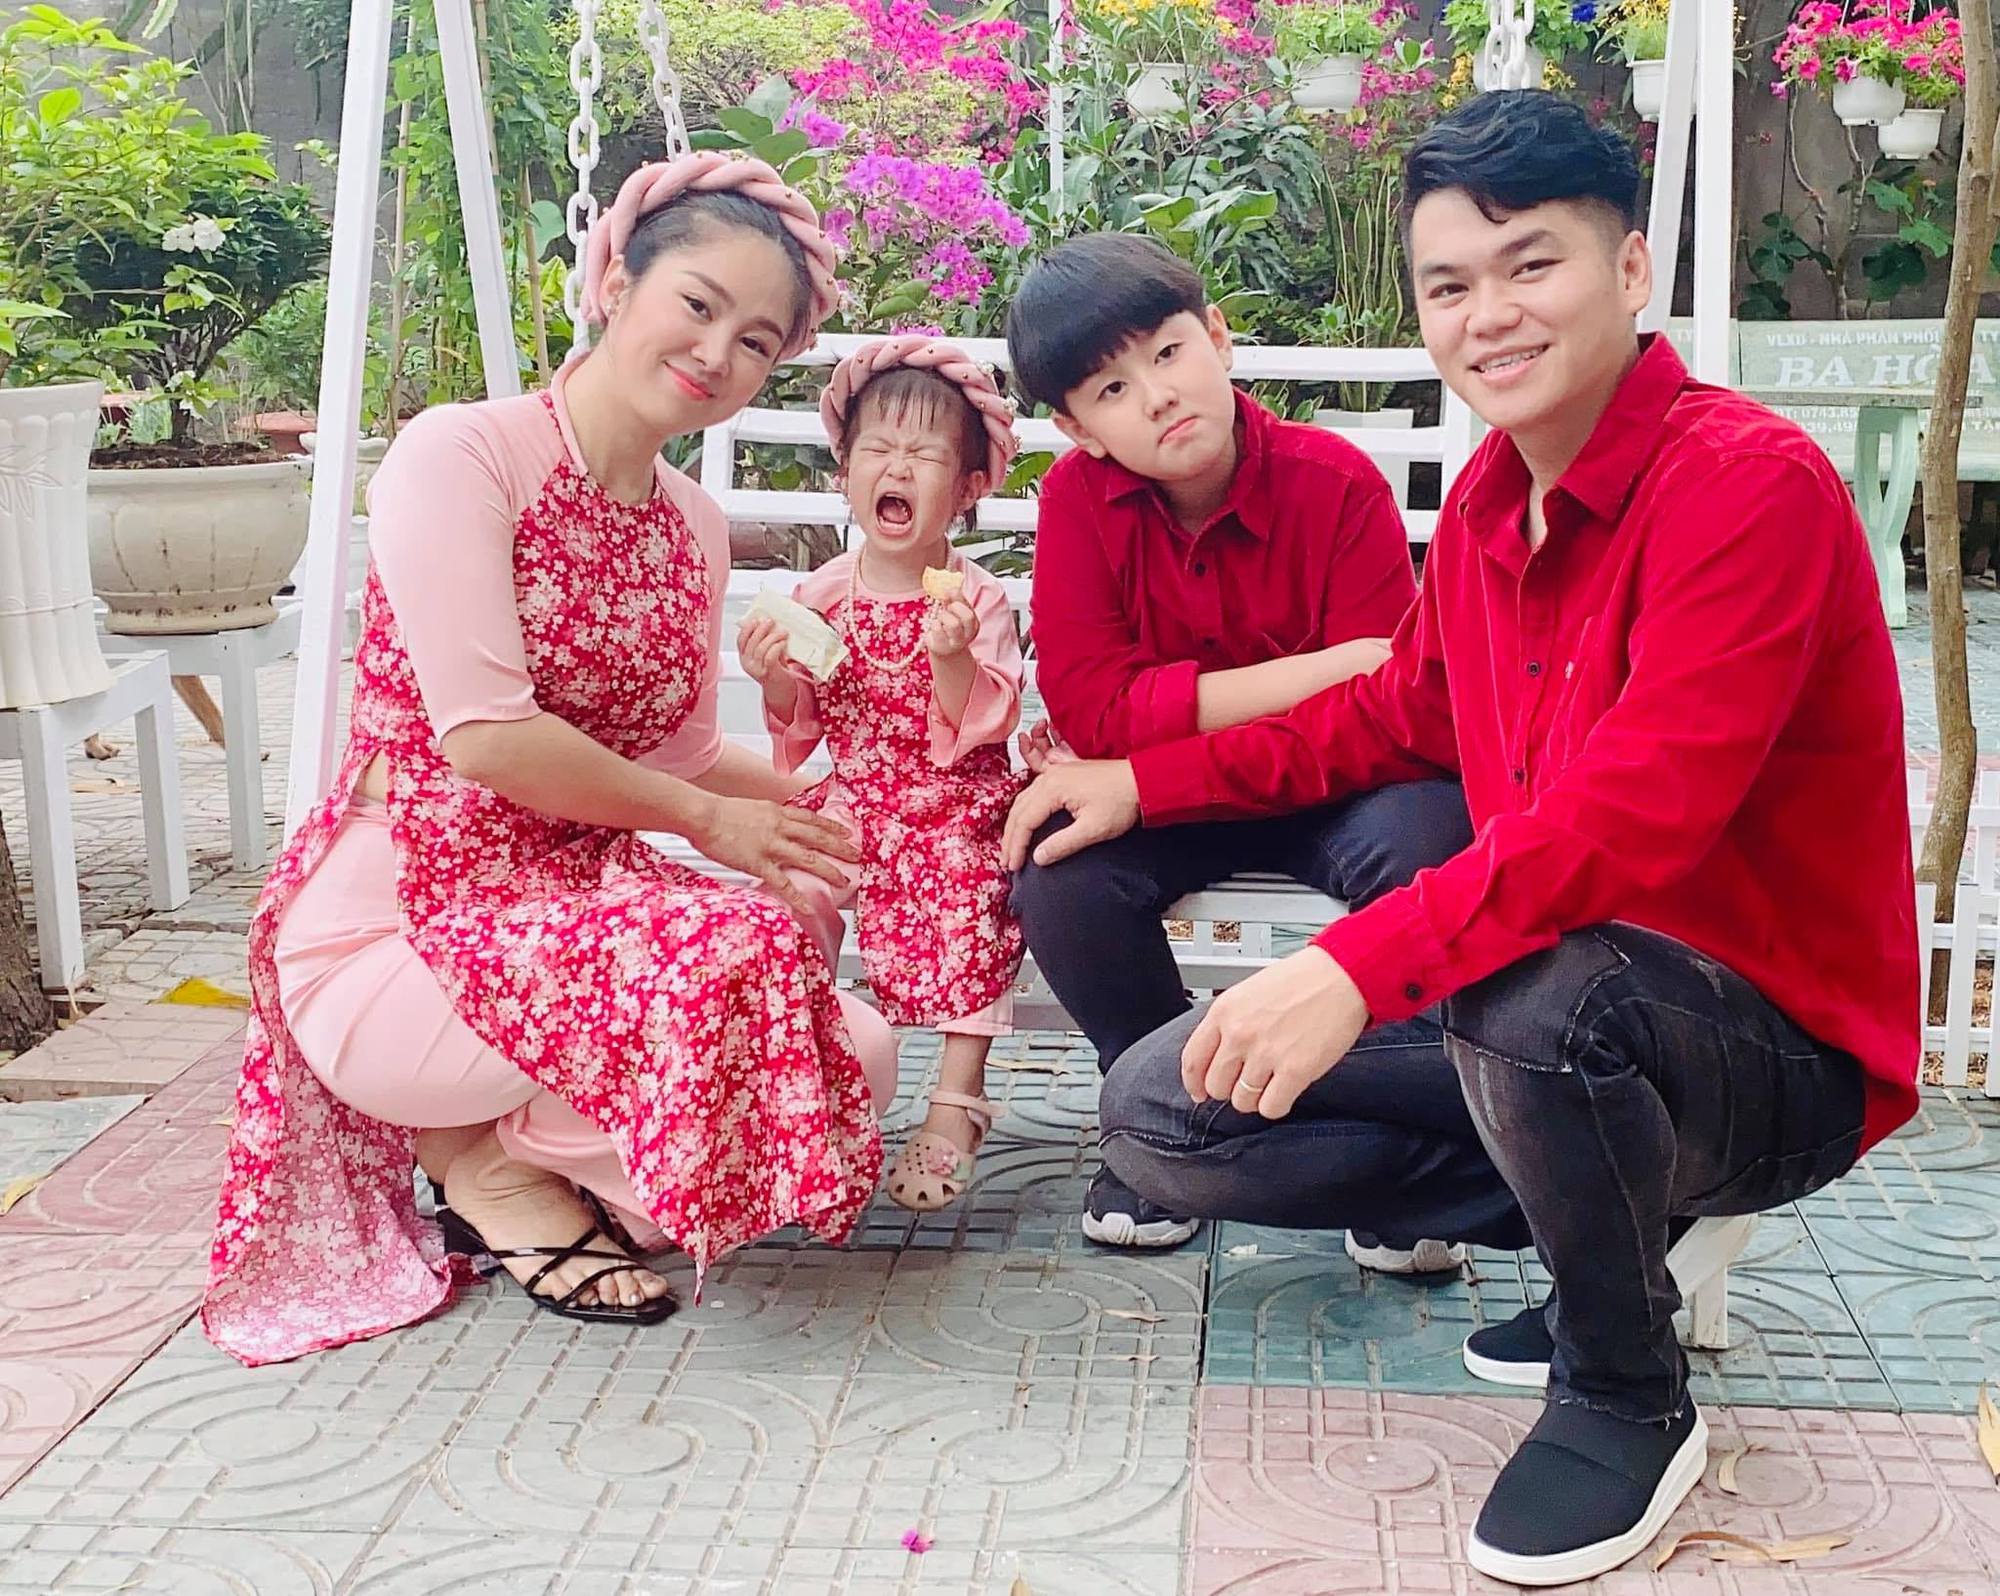 Ngo Thanh Van and a series of Vietnamese beauties married young: The one who was pampered to the fullest, everyone went their separate ways - Photo 8.